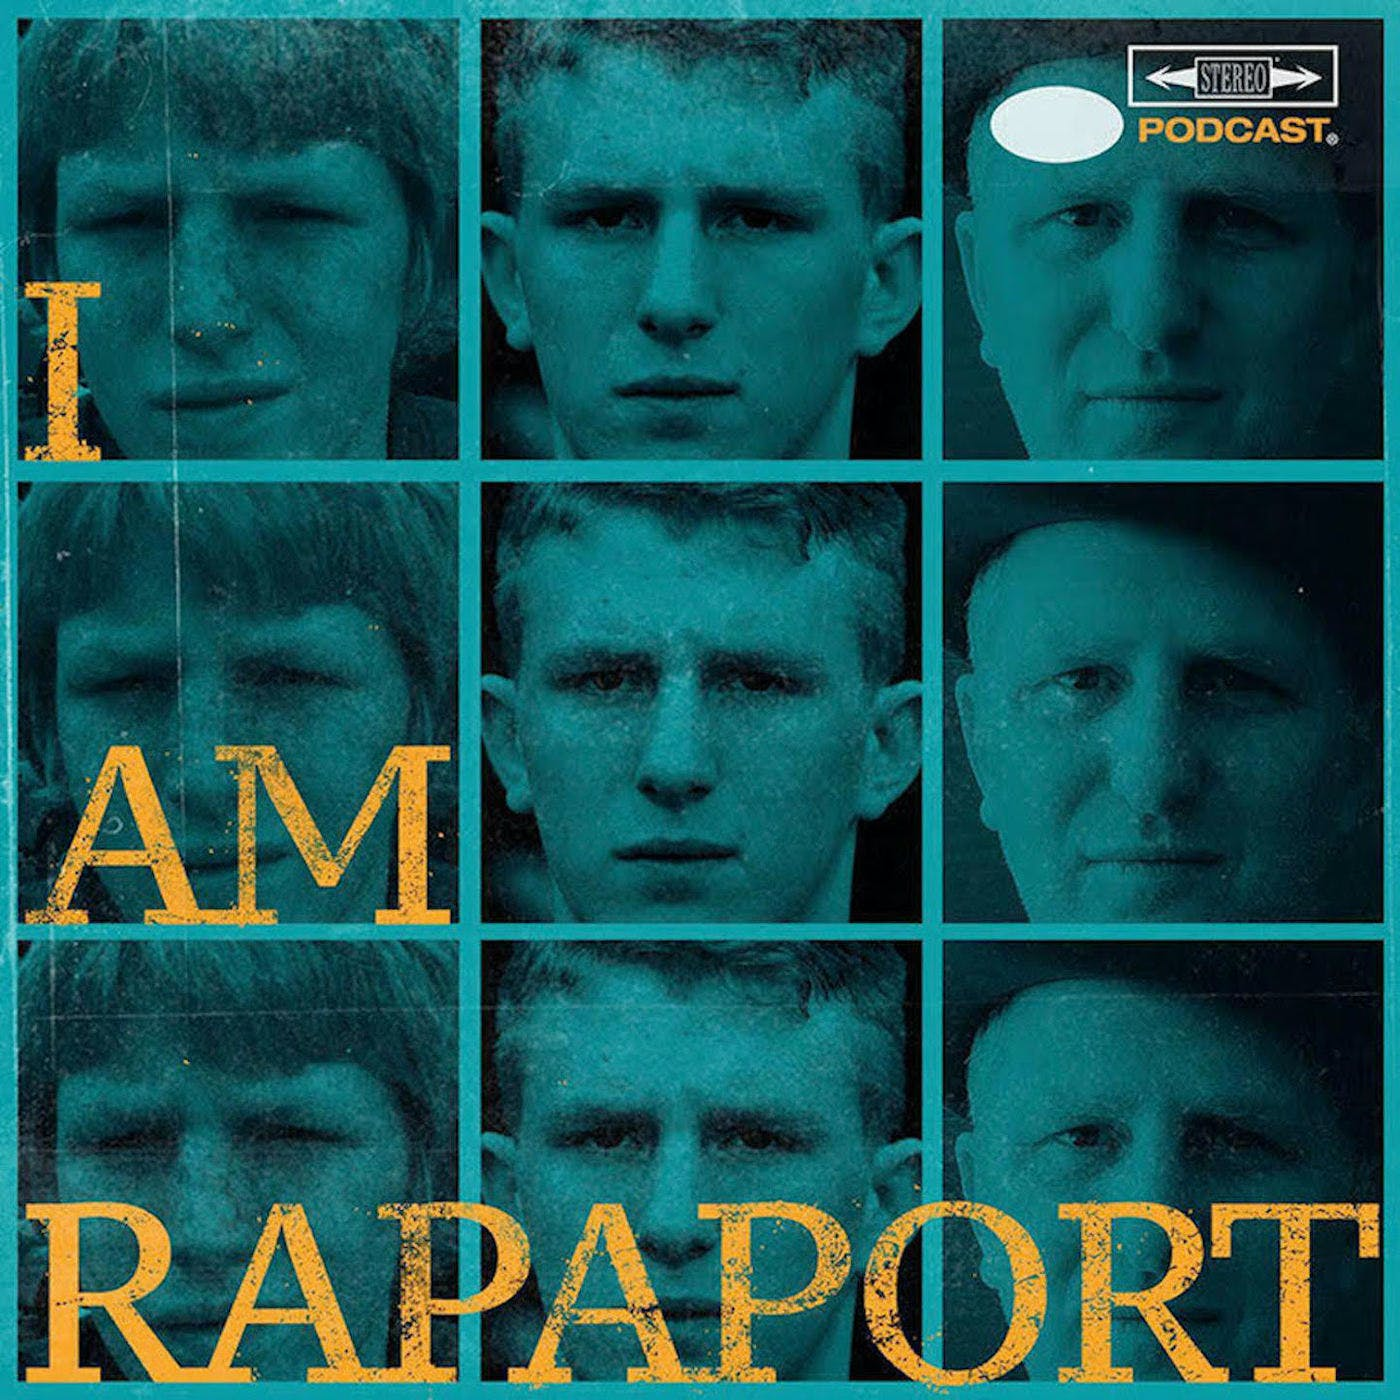 EP 520 - 2018 SICK F*CK OF THE YEAR: THE SICK SIXTEEN/LEBRON JAMES AP ATHLETE OF THE YEAR?/ MOVIES TO WATCH/DROSE PLAYS IN CHICAGO/2018 RAPAPORT RECAP